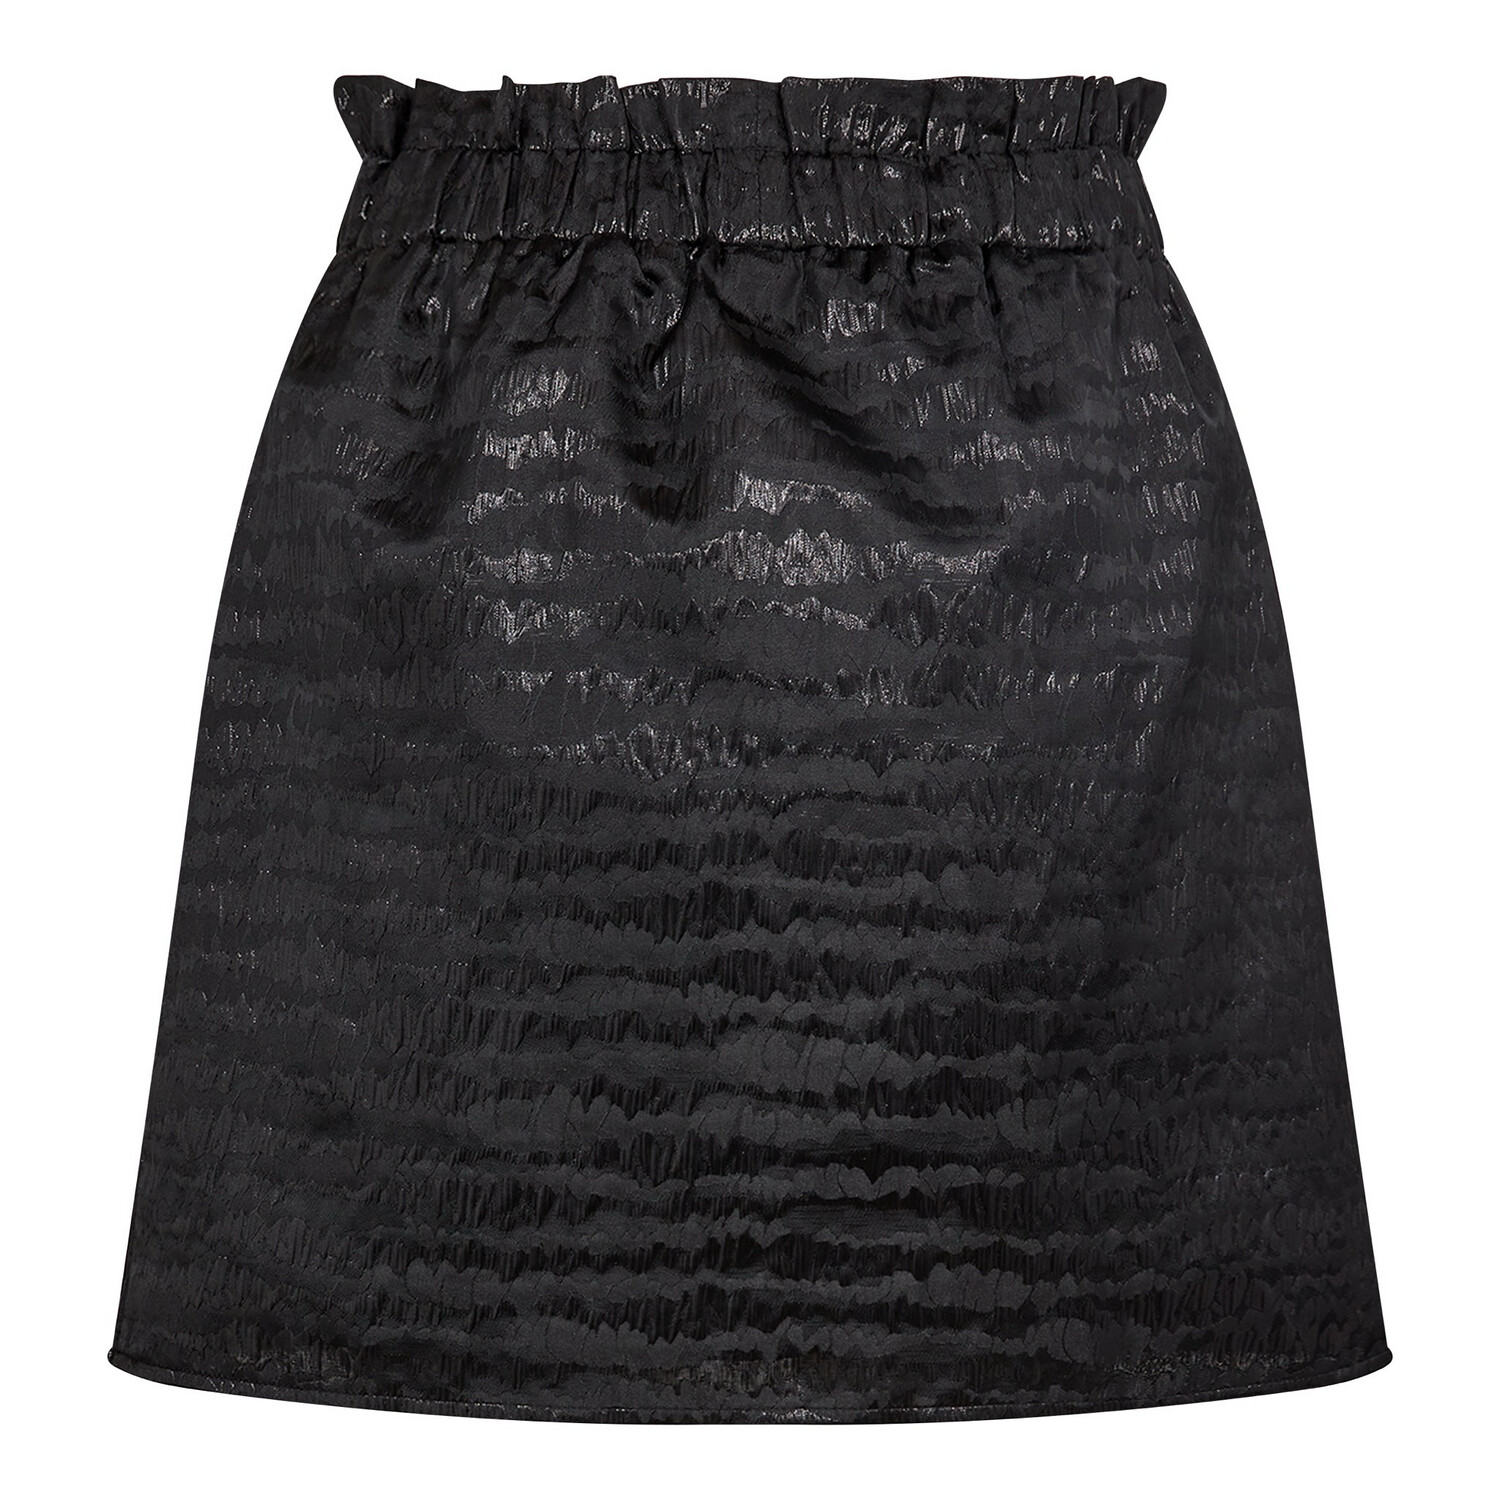 Co Couture Skirt Stripe - Black